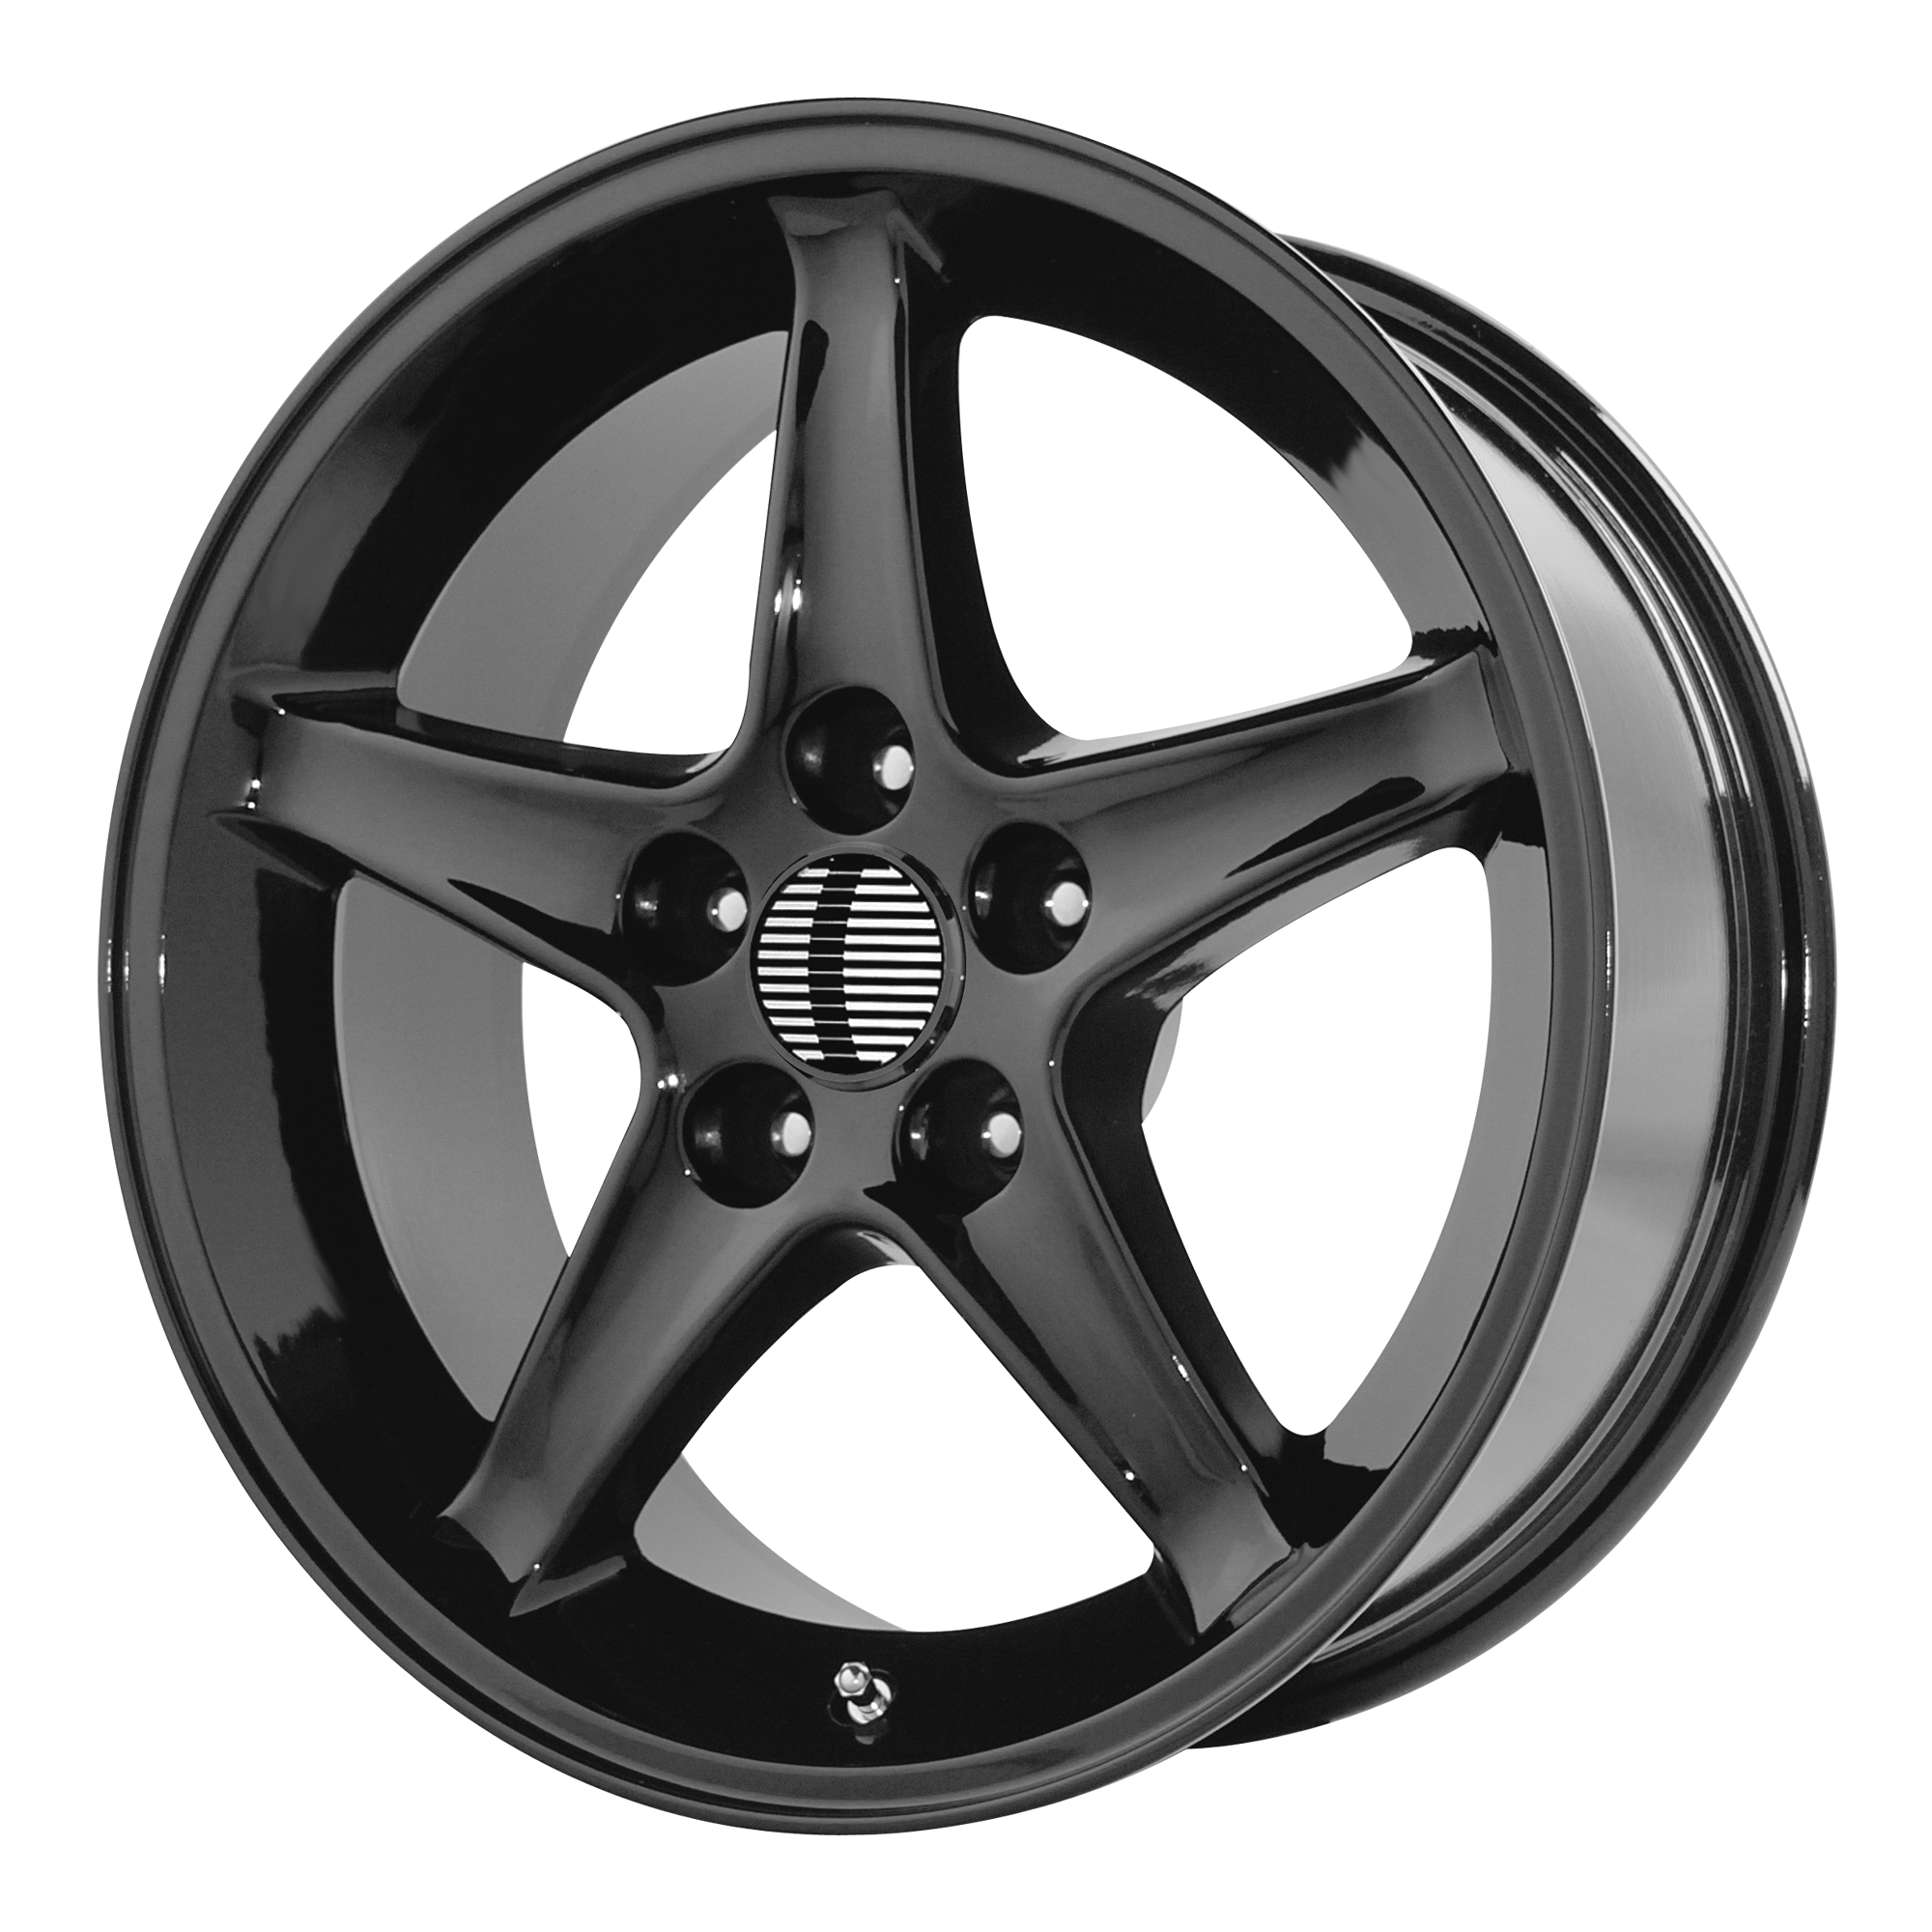 102C 17x9 4x108.00 GLOSS BLACK (18 mm) - Tires and Engine Performance